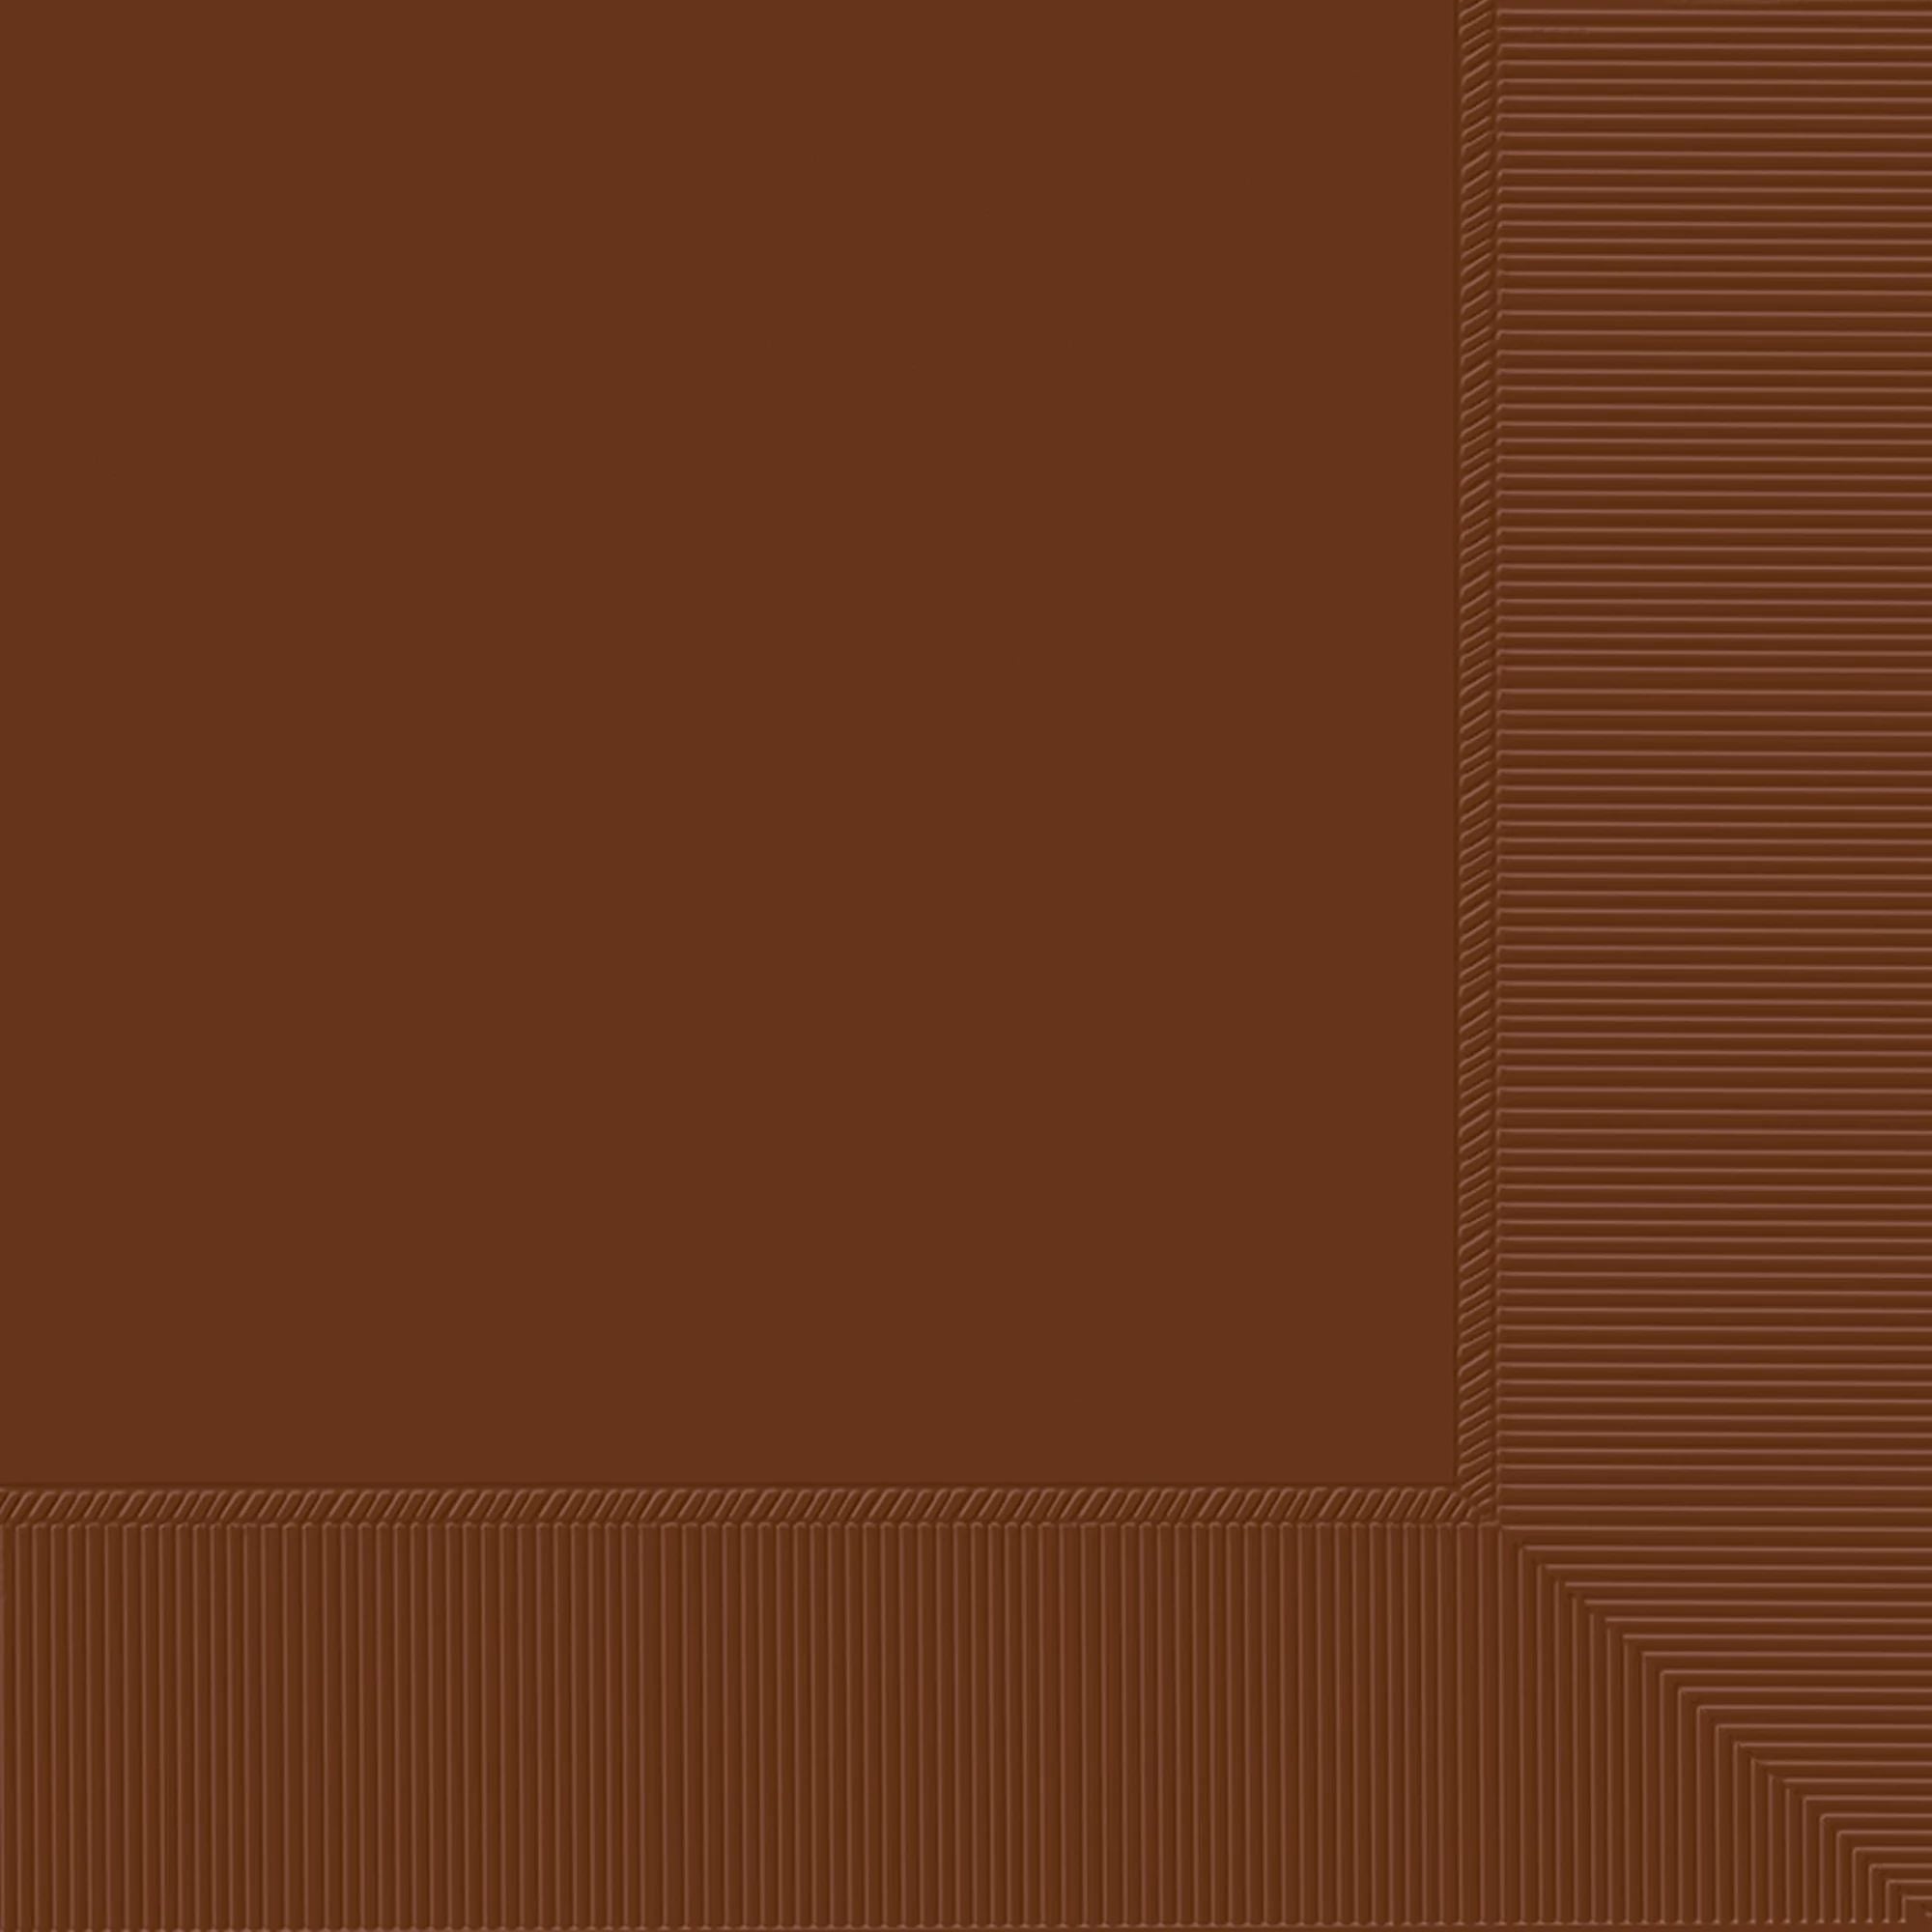 2-Ply Luncheon Napkin 40CT - Chocolate Brown